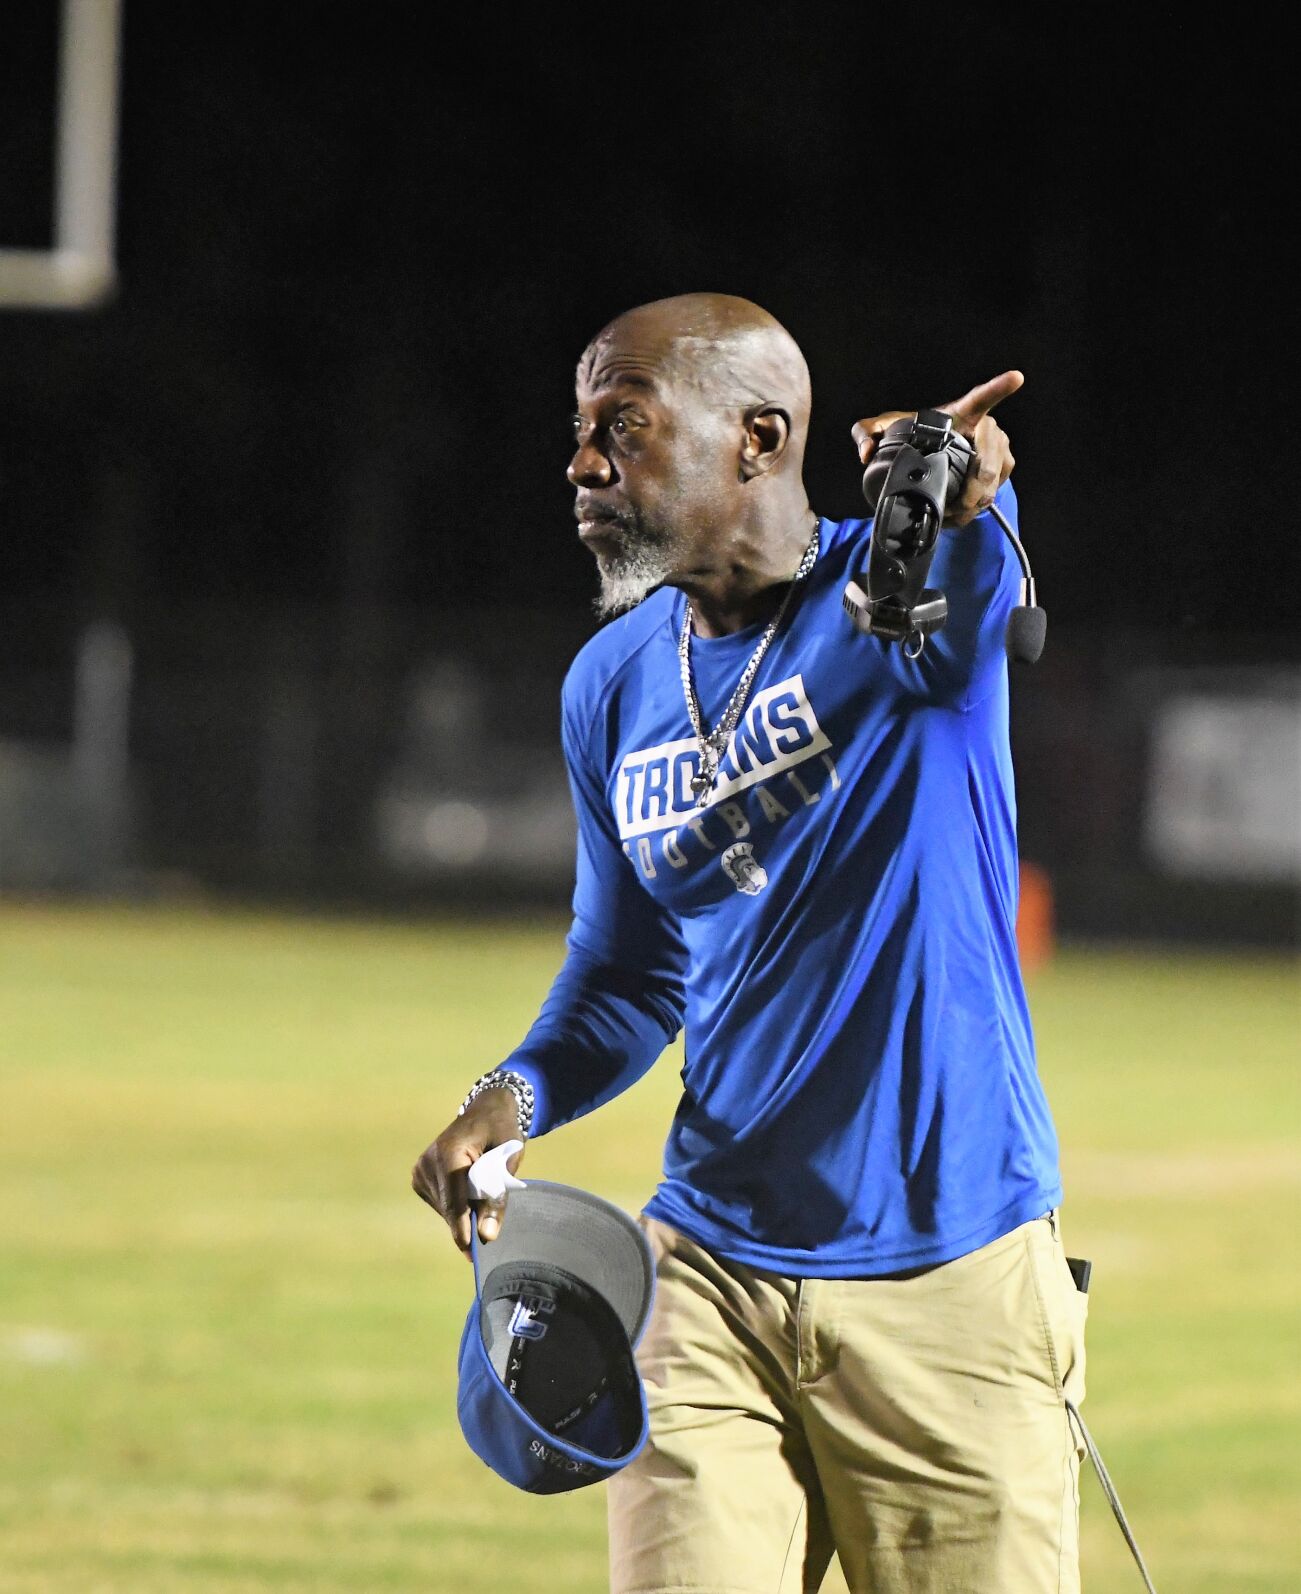 Shaun Wright Named Lower State Coach of the Year, Cross High School Football Team Achieves 11-Game Win Streak